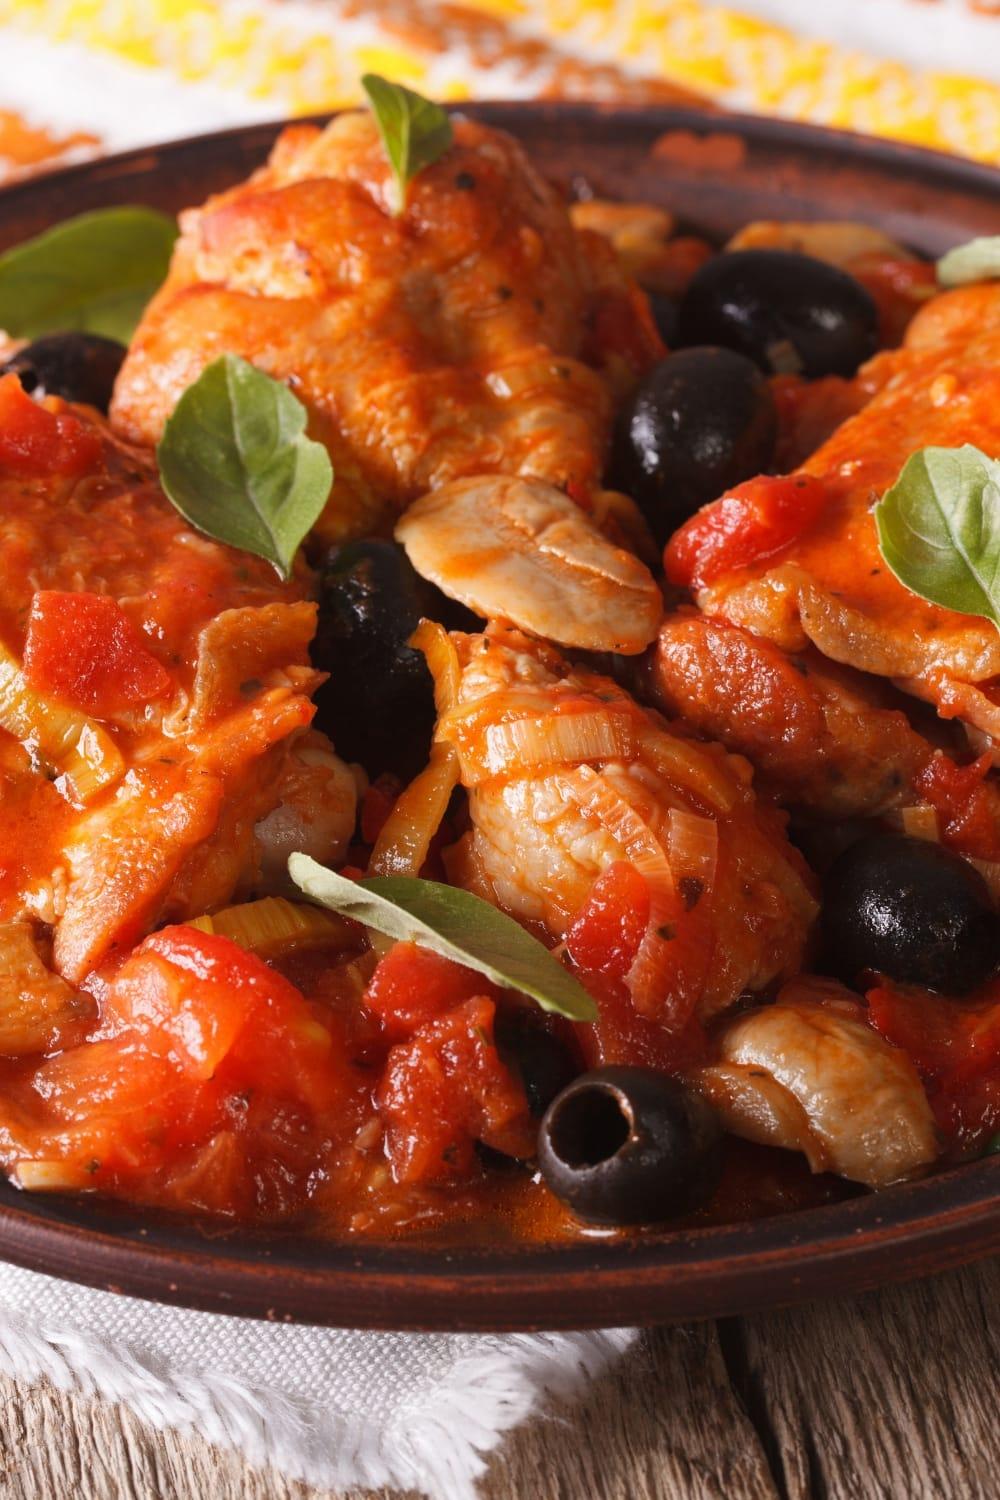 Homemade Chicken Cacciatore with Black Olives and Tomato Sauce